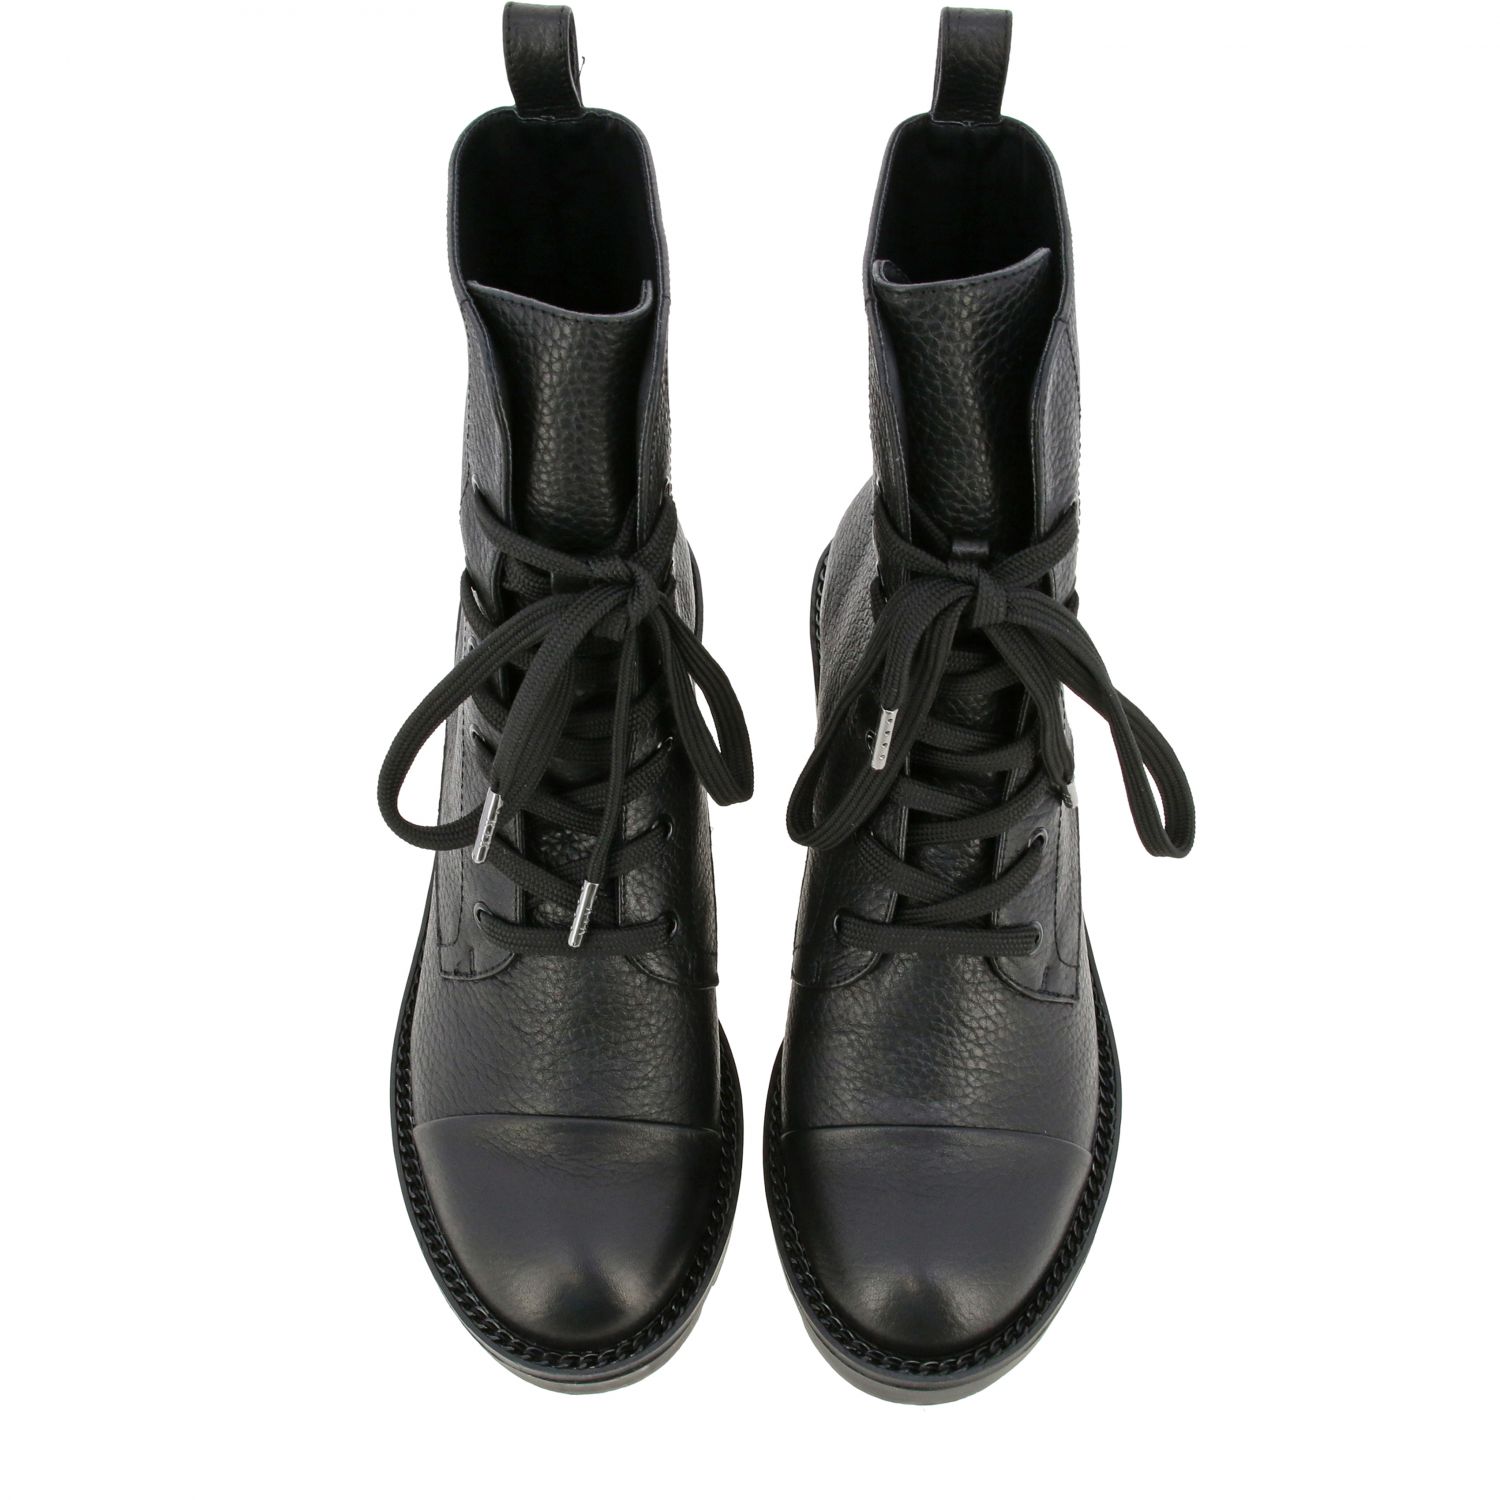 KENDALL+KYLIE PARK ANFIBIO DONNA IN PELLE NERA panama.mainapps.com 